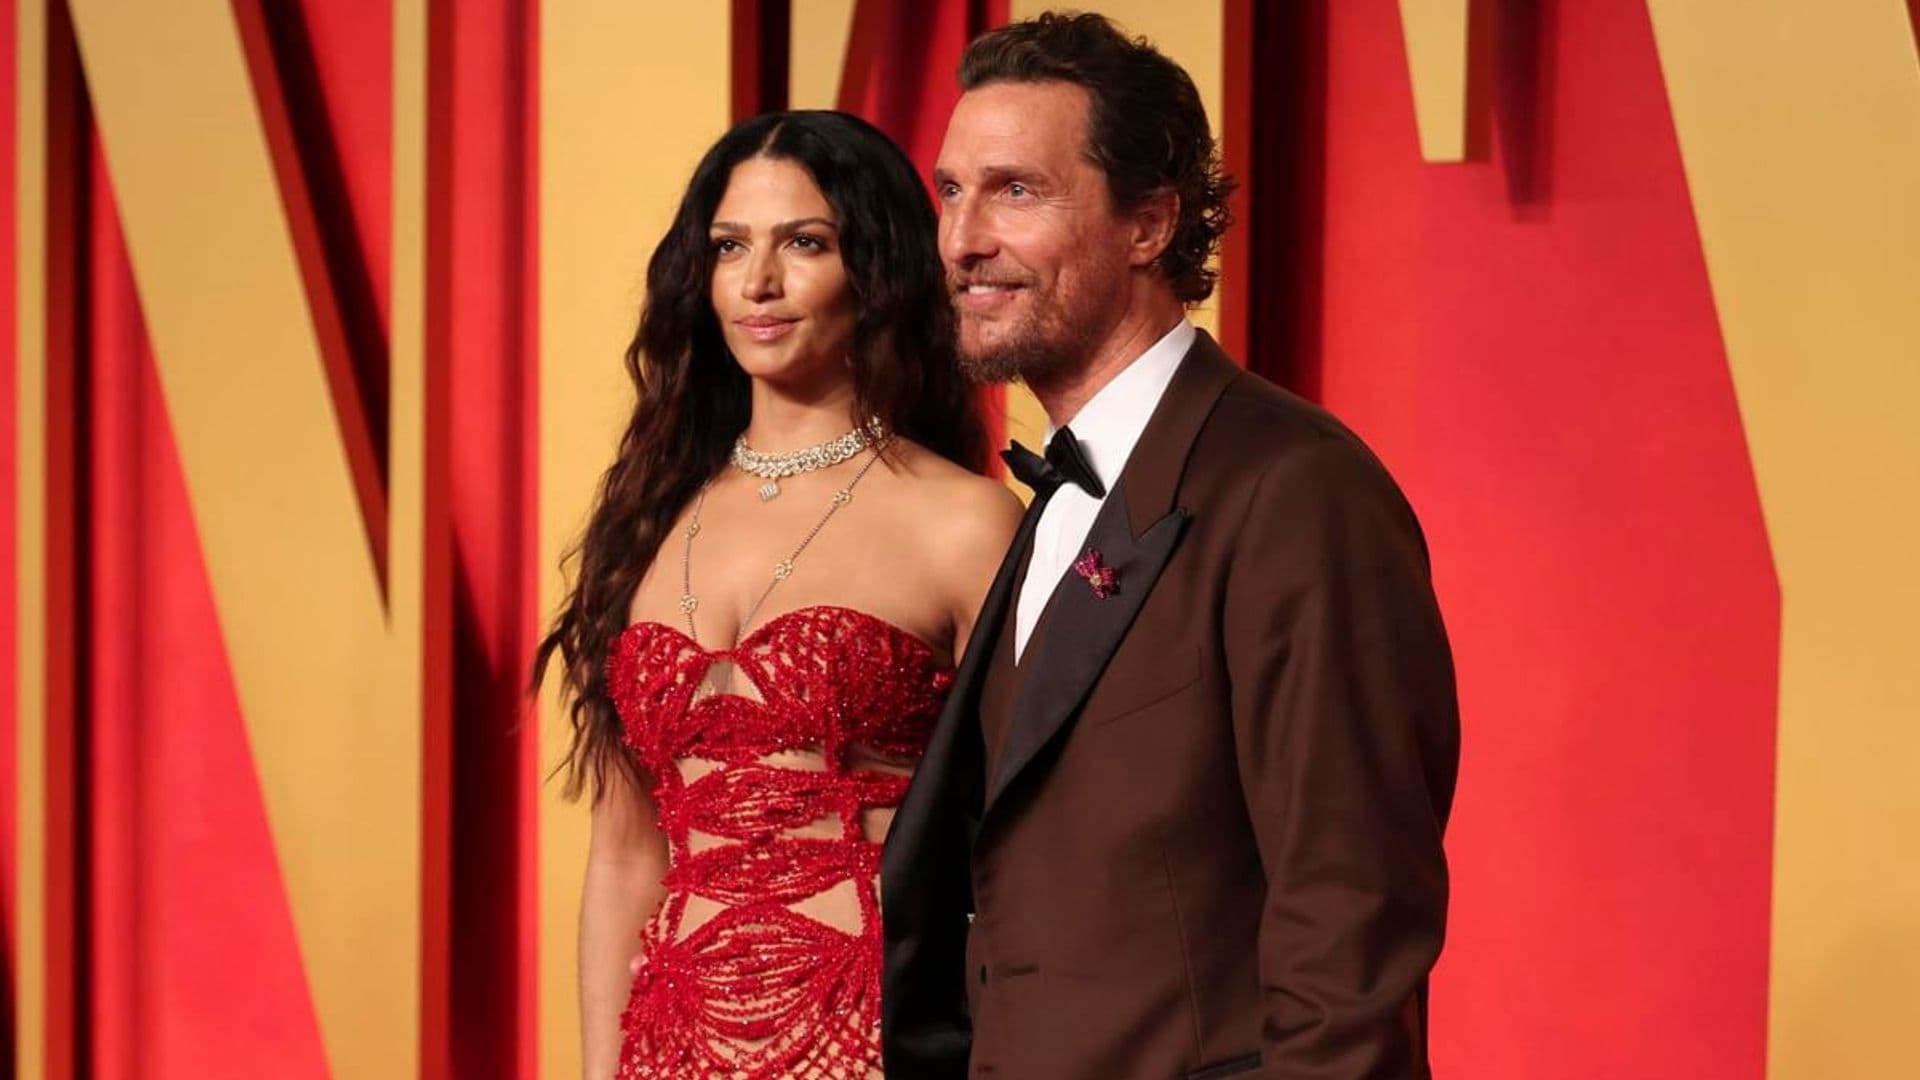 Matthew McConaughey’s romantic post sparks playful banter with Camila Alves